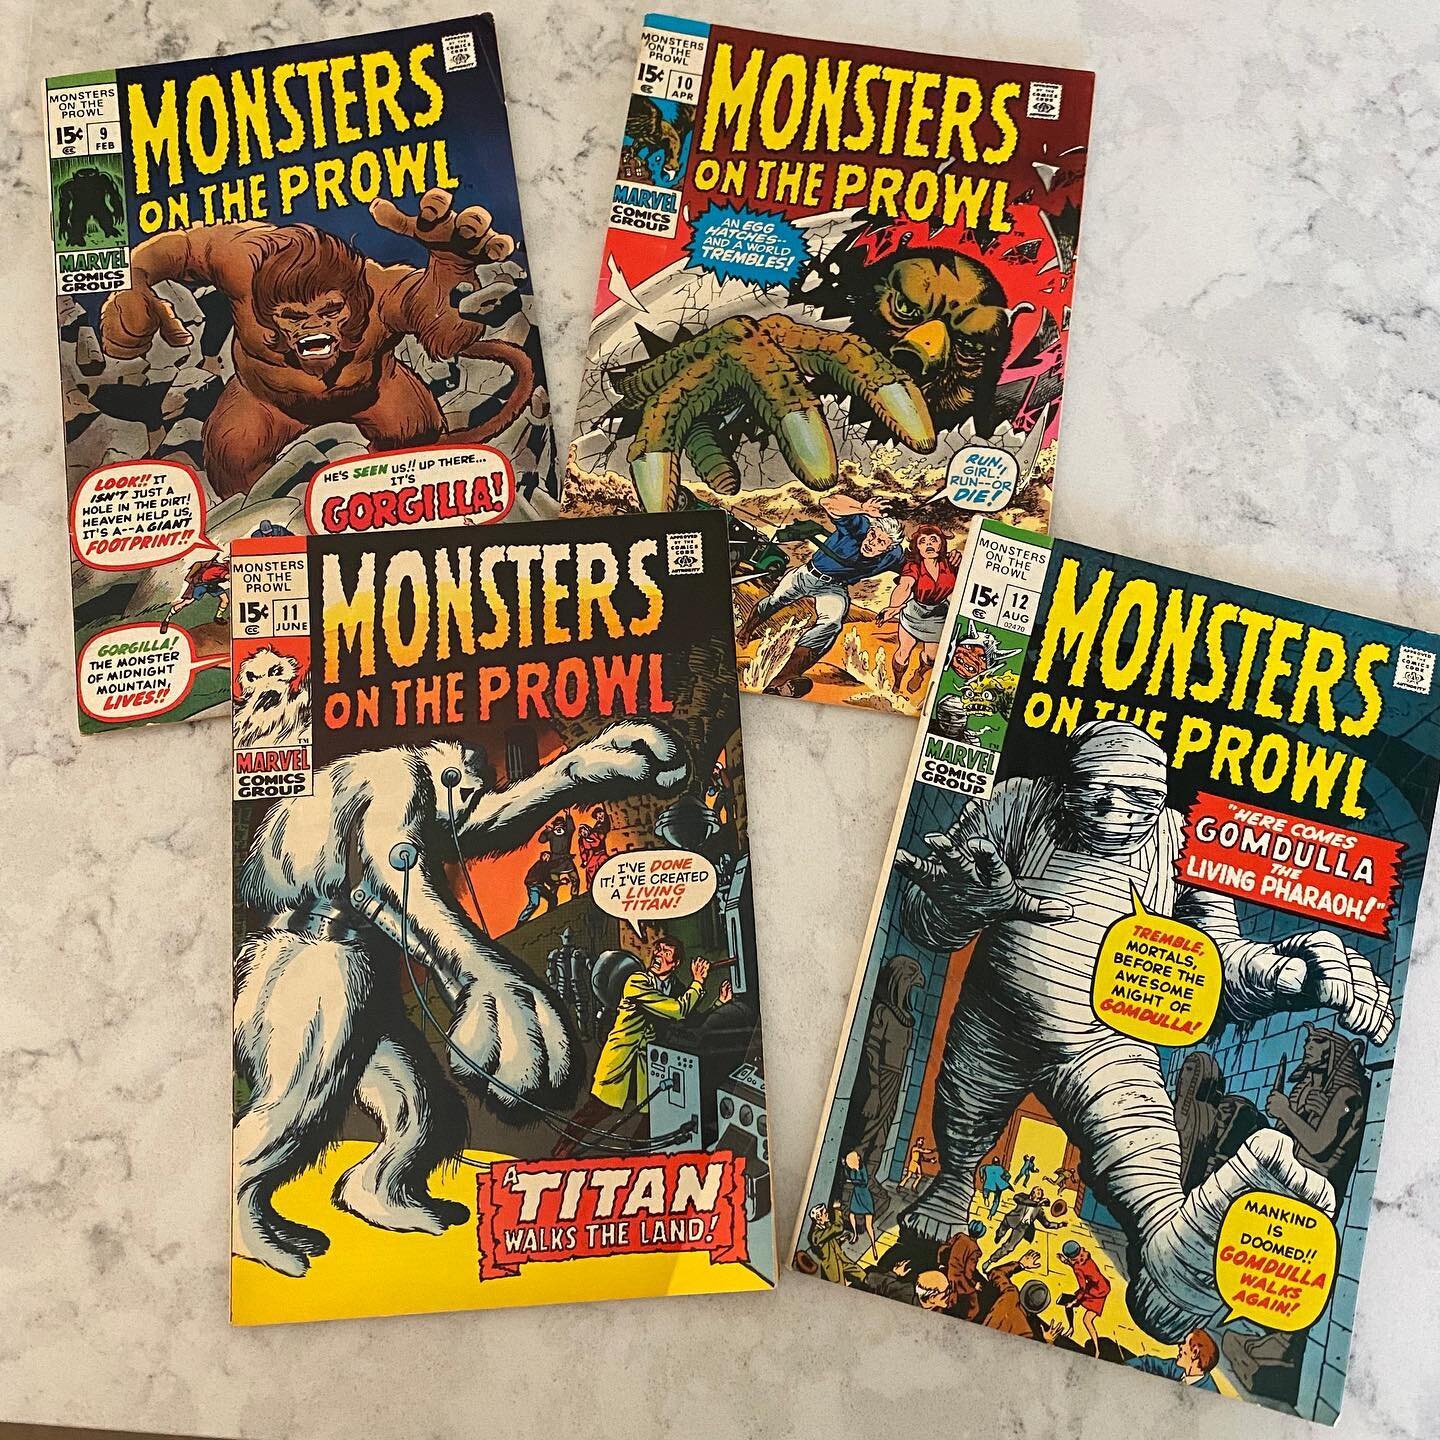 Monday mail call! Love these Bronze Age horror reprint comics!

&mdash;&mdash;&mdash;&mdash;&mdash;&mdash;&mdash;&mdash;&mdash;&mdash;&mdash;&mdash;&mdash;&mdash;&mdash;&mdash;&mdash;
#comics #comicbooks #bronzeagecomics #horrorcomics #monstersonthep